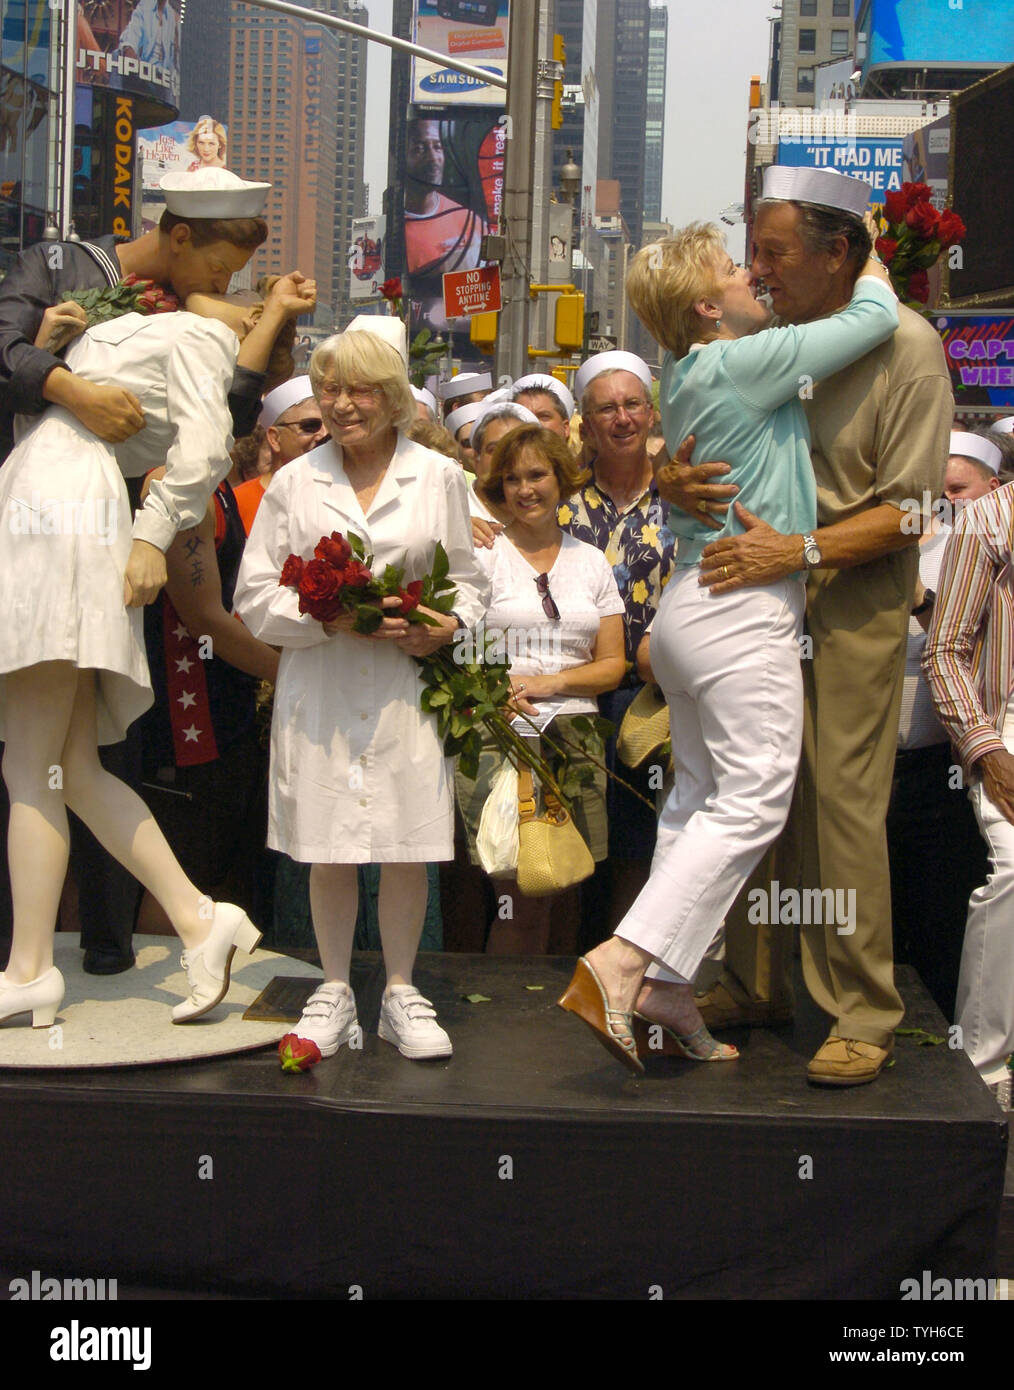 Edith Shain and Carl Muscarello, who gets a kiss from wife Shelly, are shown next to the Unconditional Surrender Sculpture at the 60th Anniversary of the end of World War II in Times Square on August 14, 2005.  They were recreating the famous pose from the Alfred Eisenstadt photograph celebrating the Allied victory in the war. They claim to be the original couple in the photograph.   (UPI Photo/Robin Platzer) Stock Photo